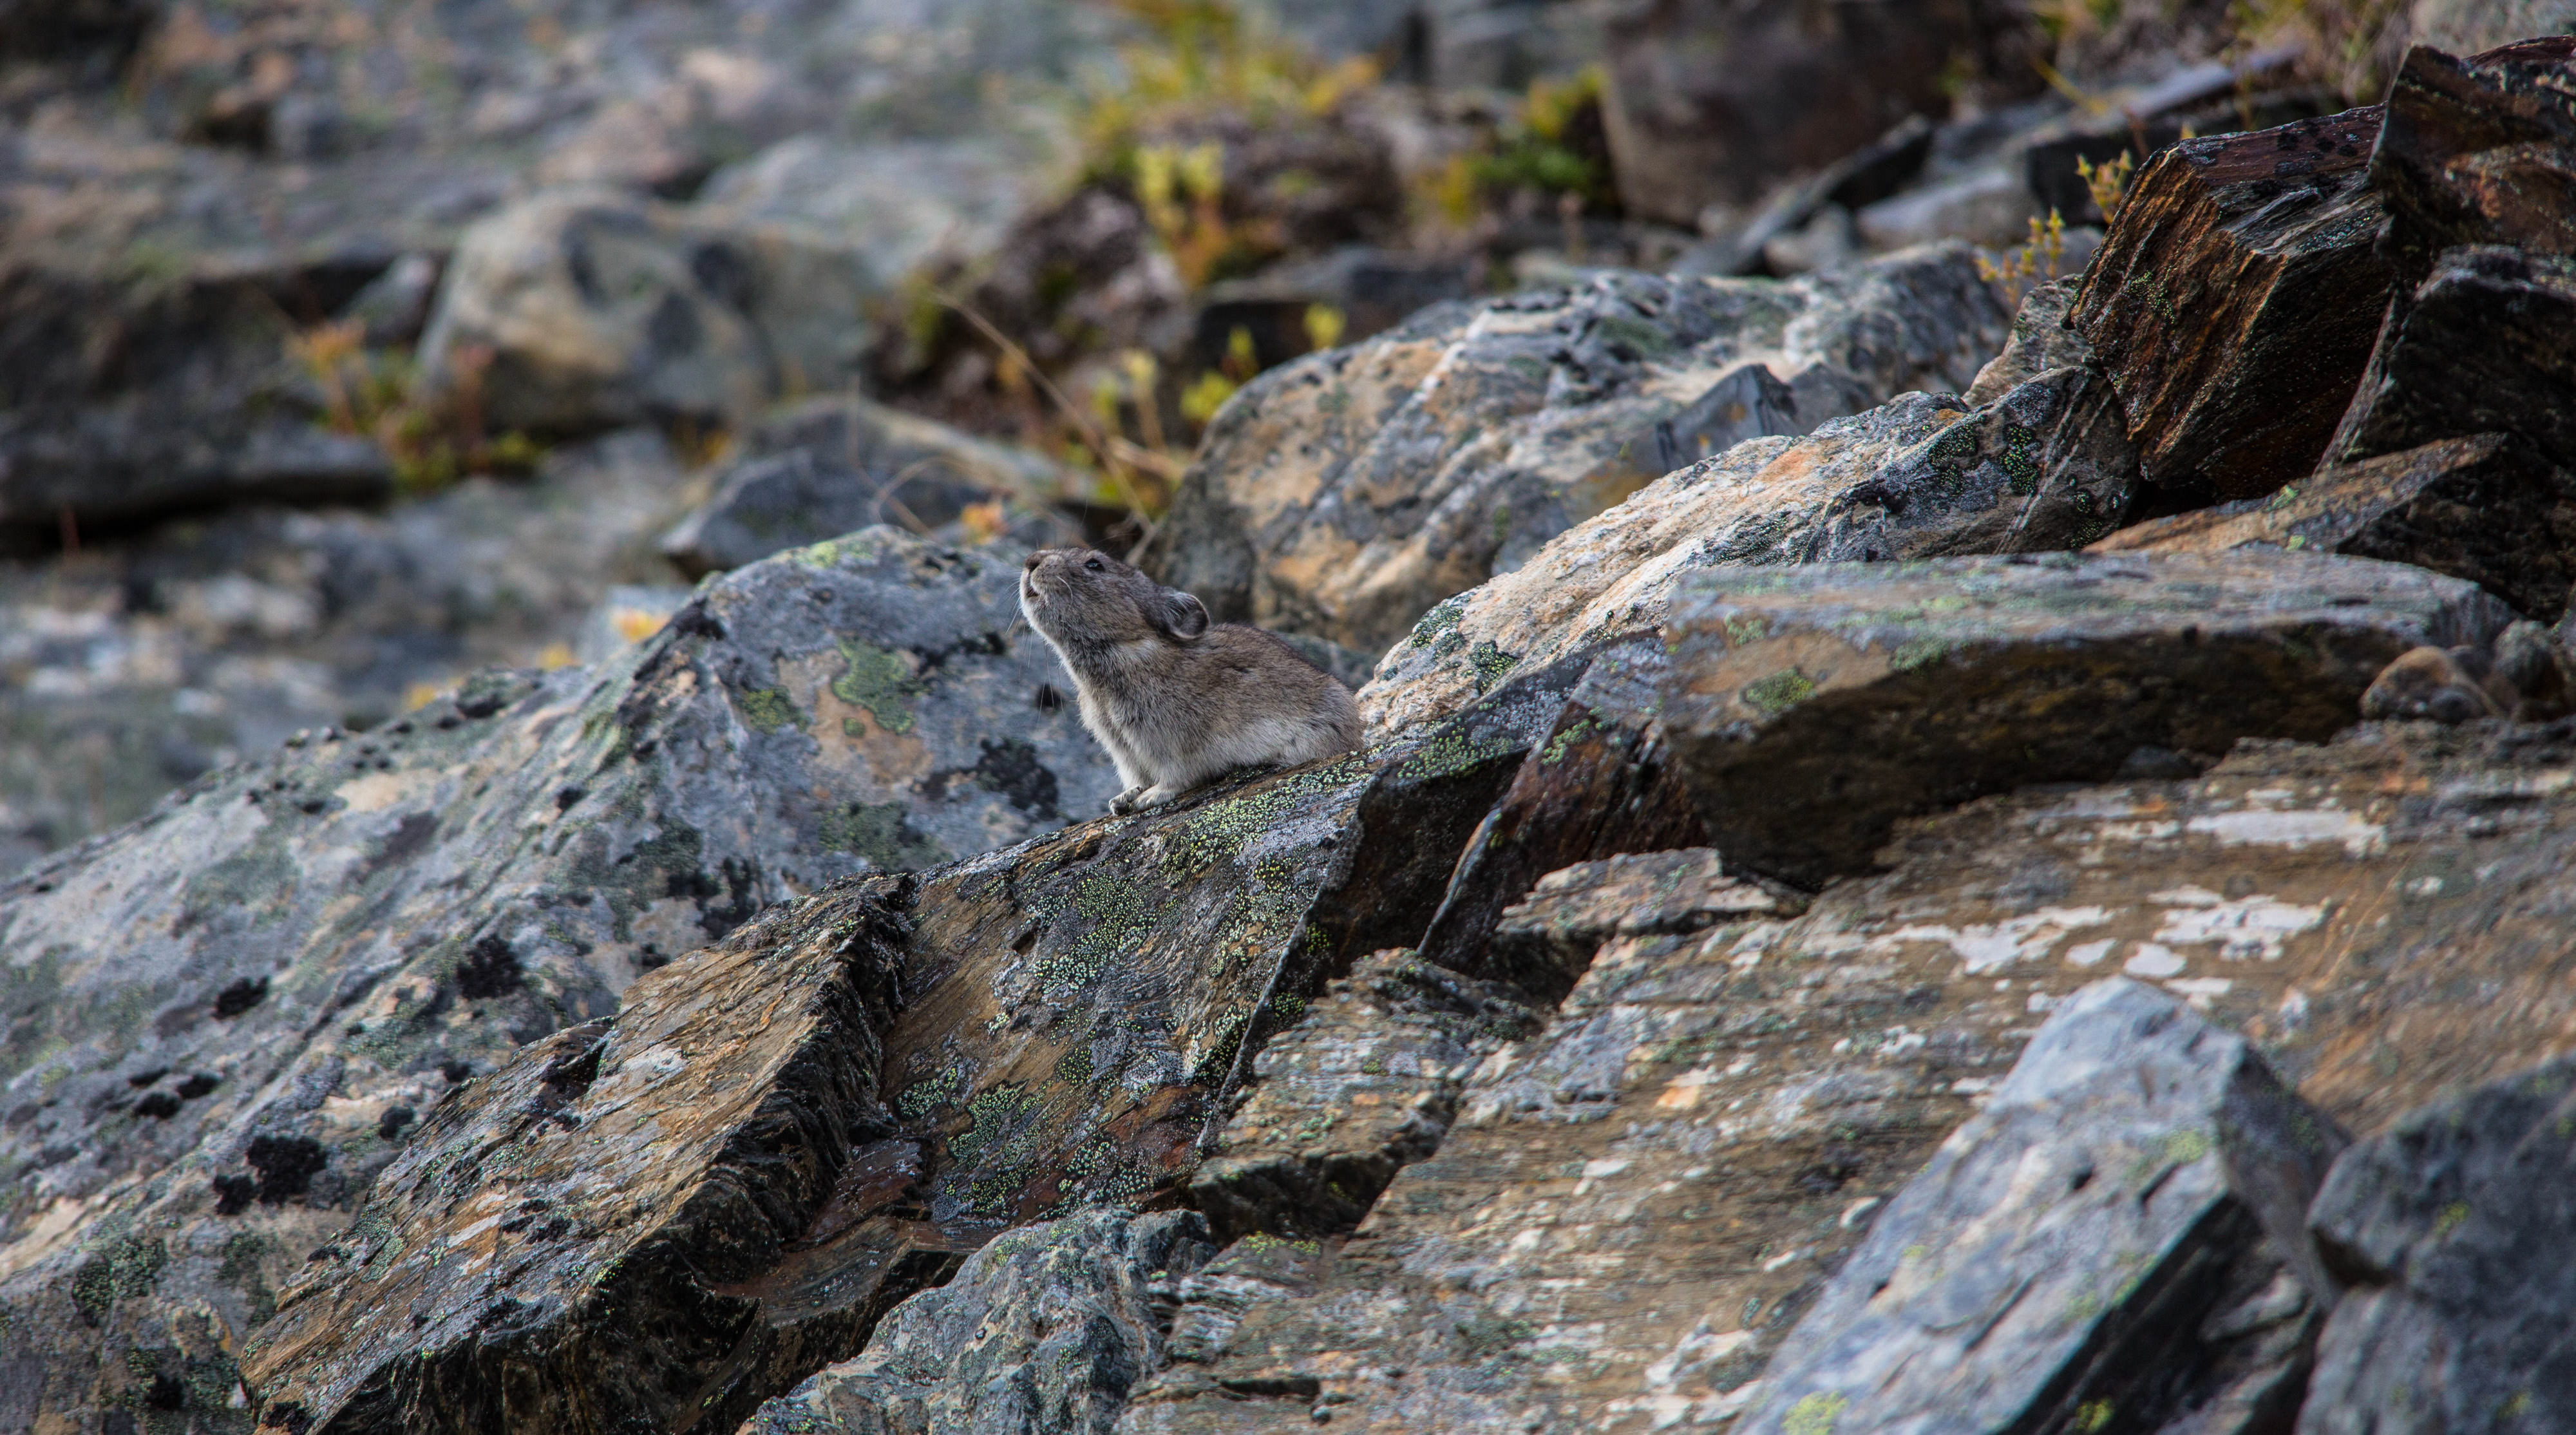 A small, brown rodent sits on a lichen-covered rock with its nose in the air and its ears pulled back.